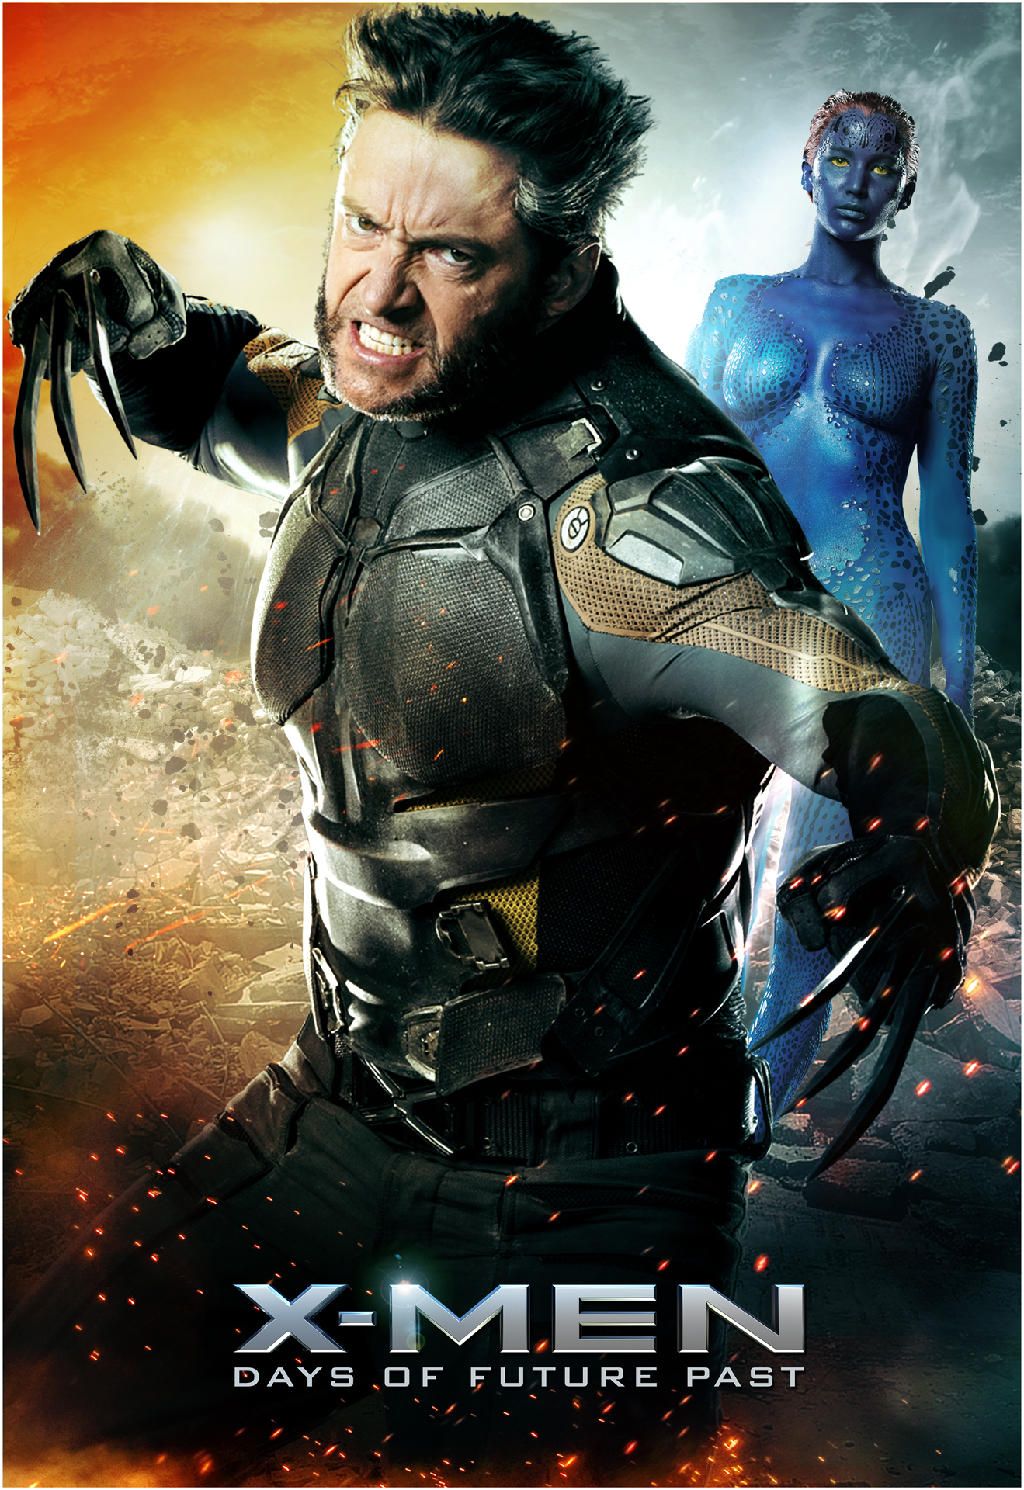 X-Men Days of Future Past Poster 2